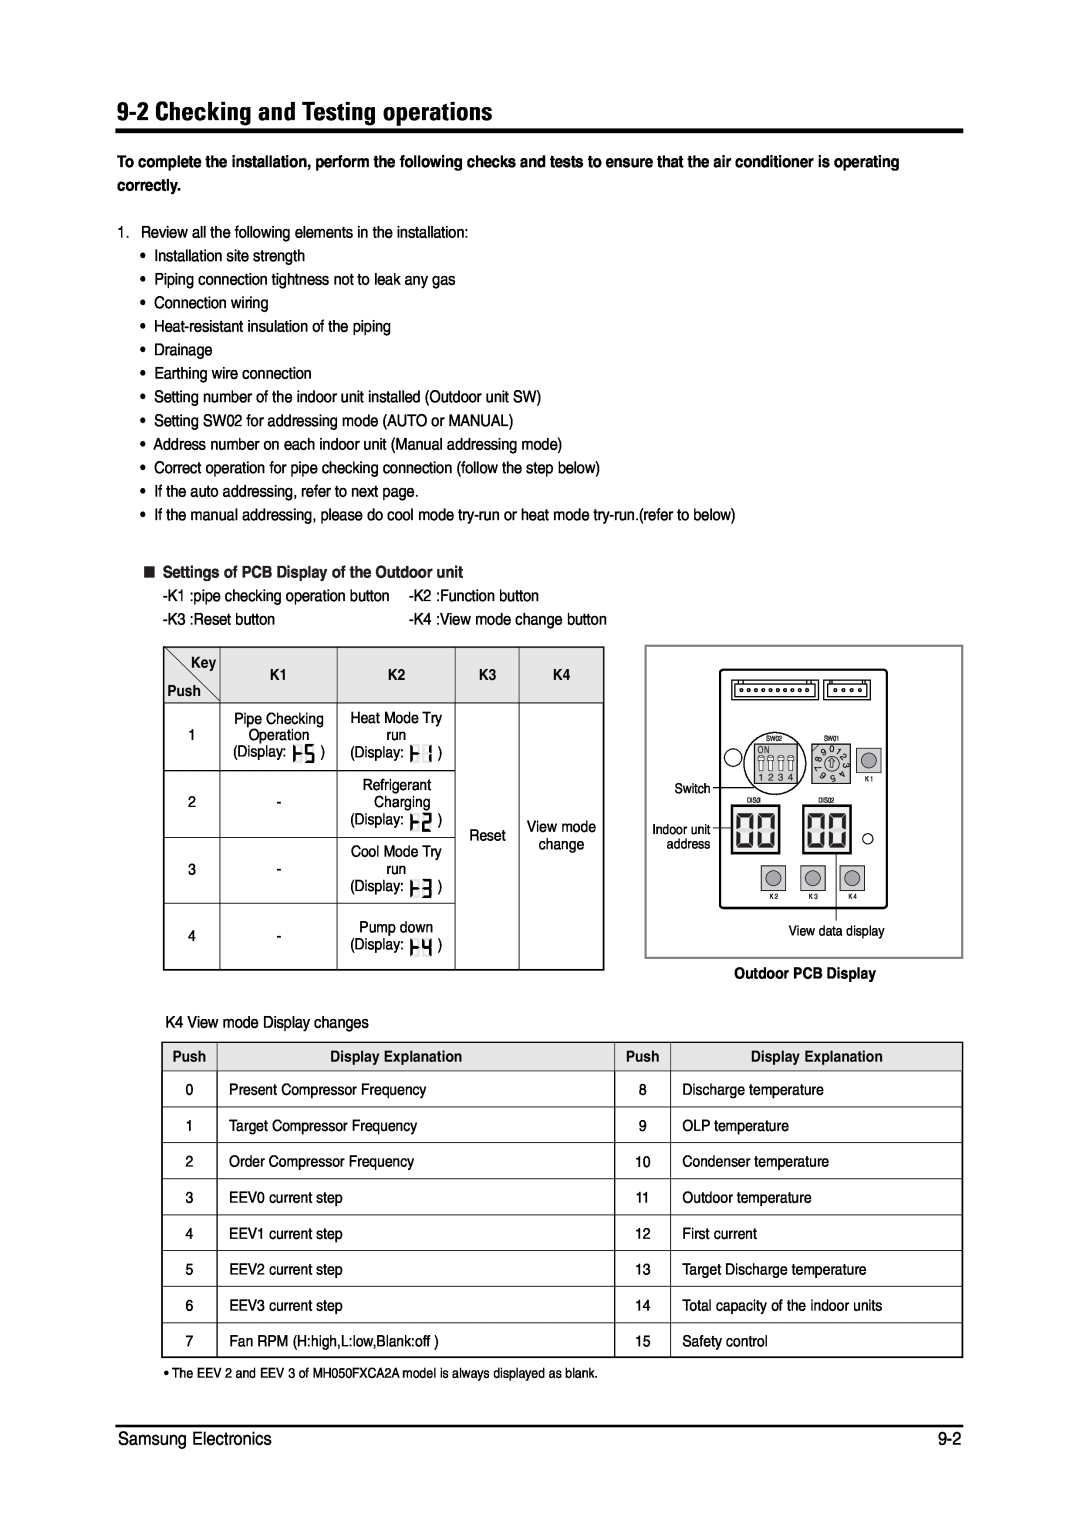 Samsung MH026FNCA service manual 9-2Checking and Testing operations, Samsung Electronics, correctly, Reset button 